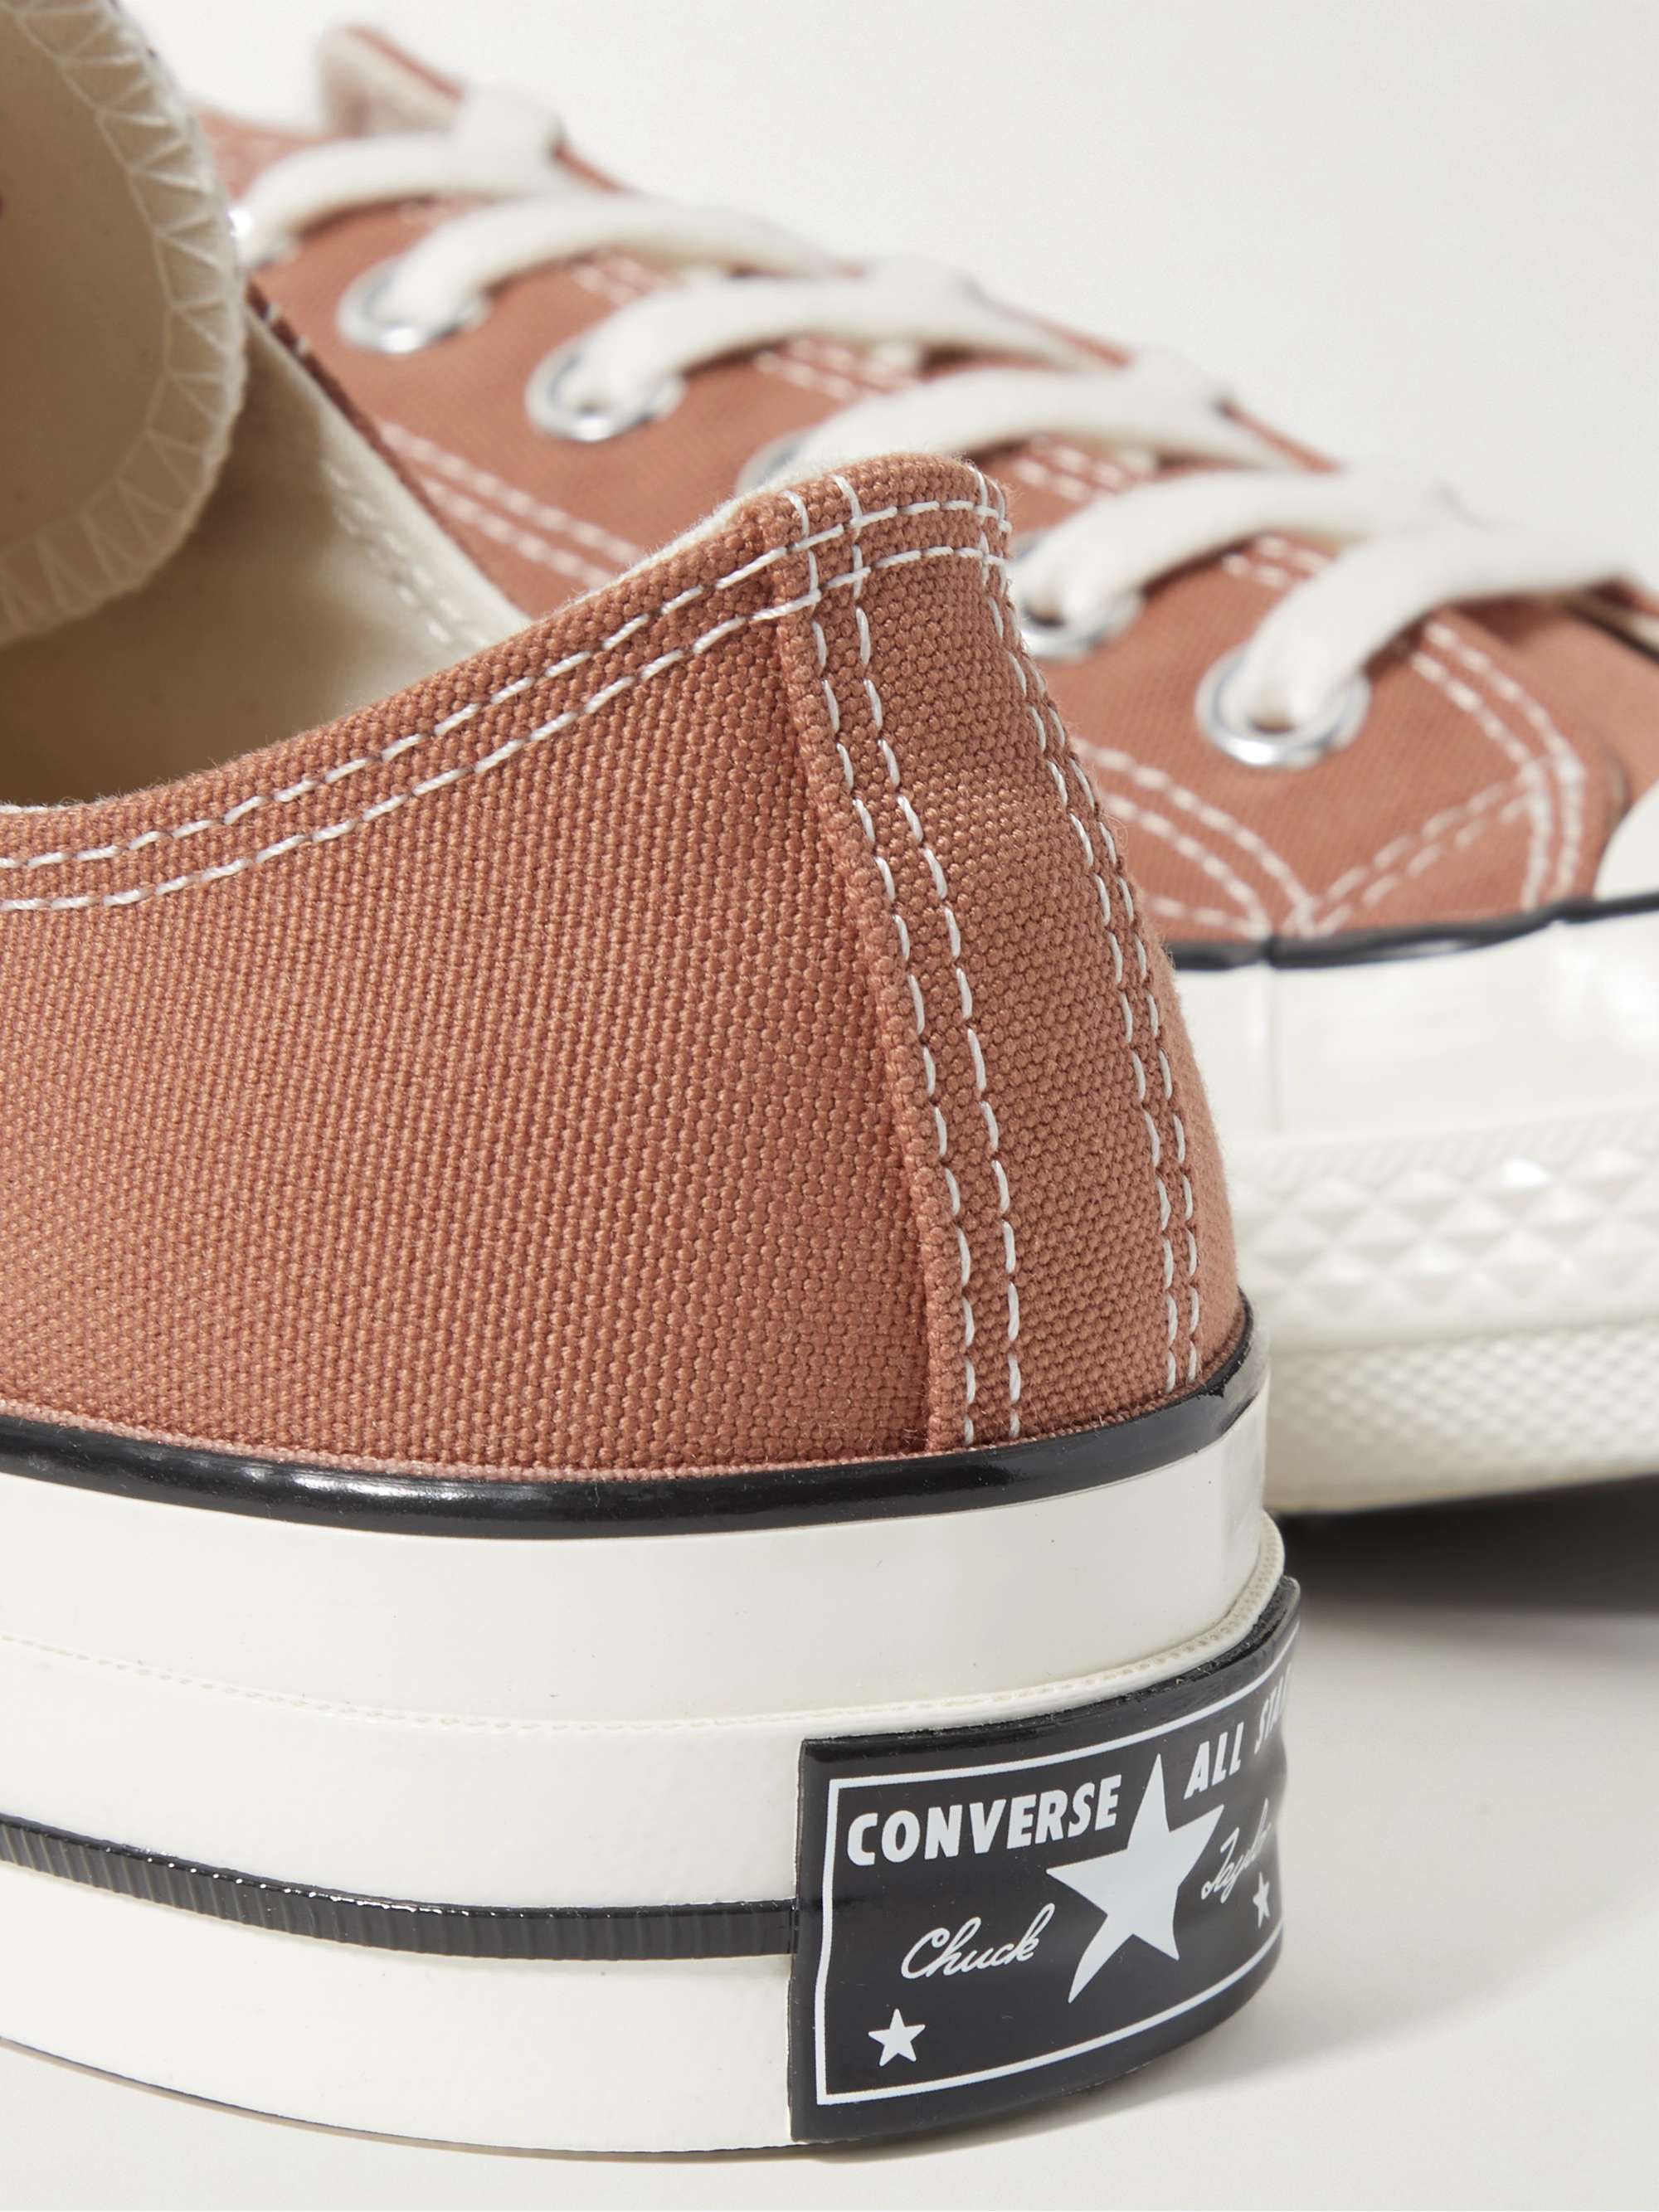 CONVERSE Chuck 70 Recycled Canvas Sneakers